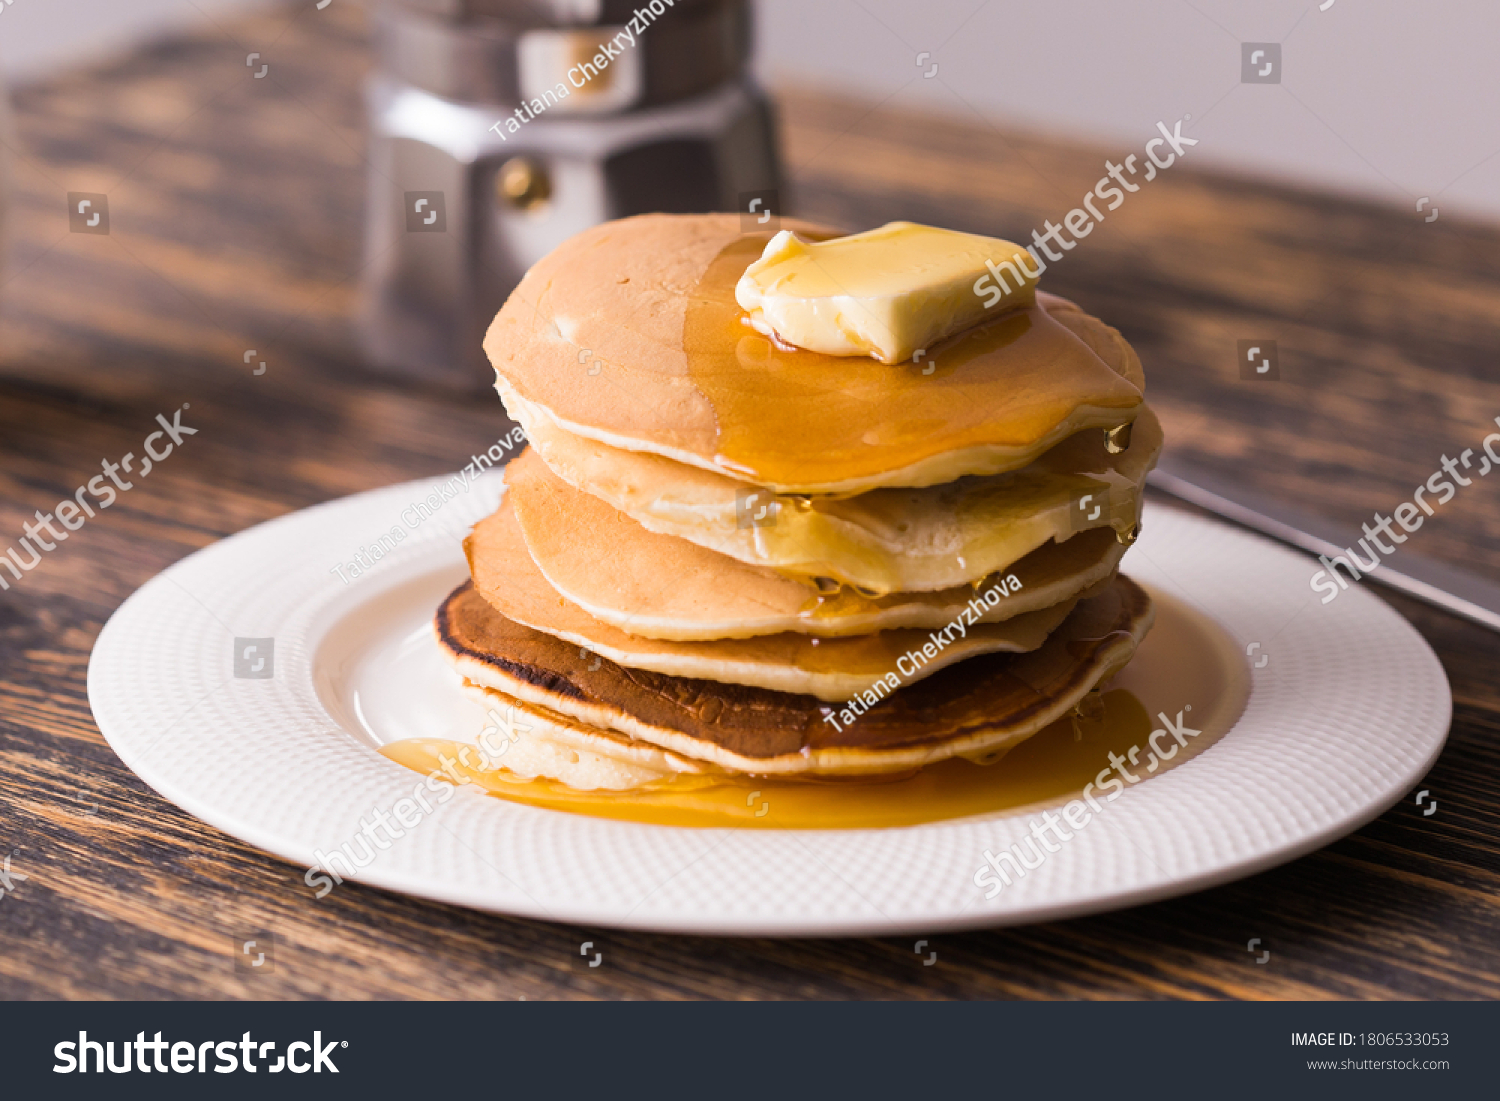 Golden pancakes with butter and warm maple syrup. #1806533053